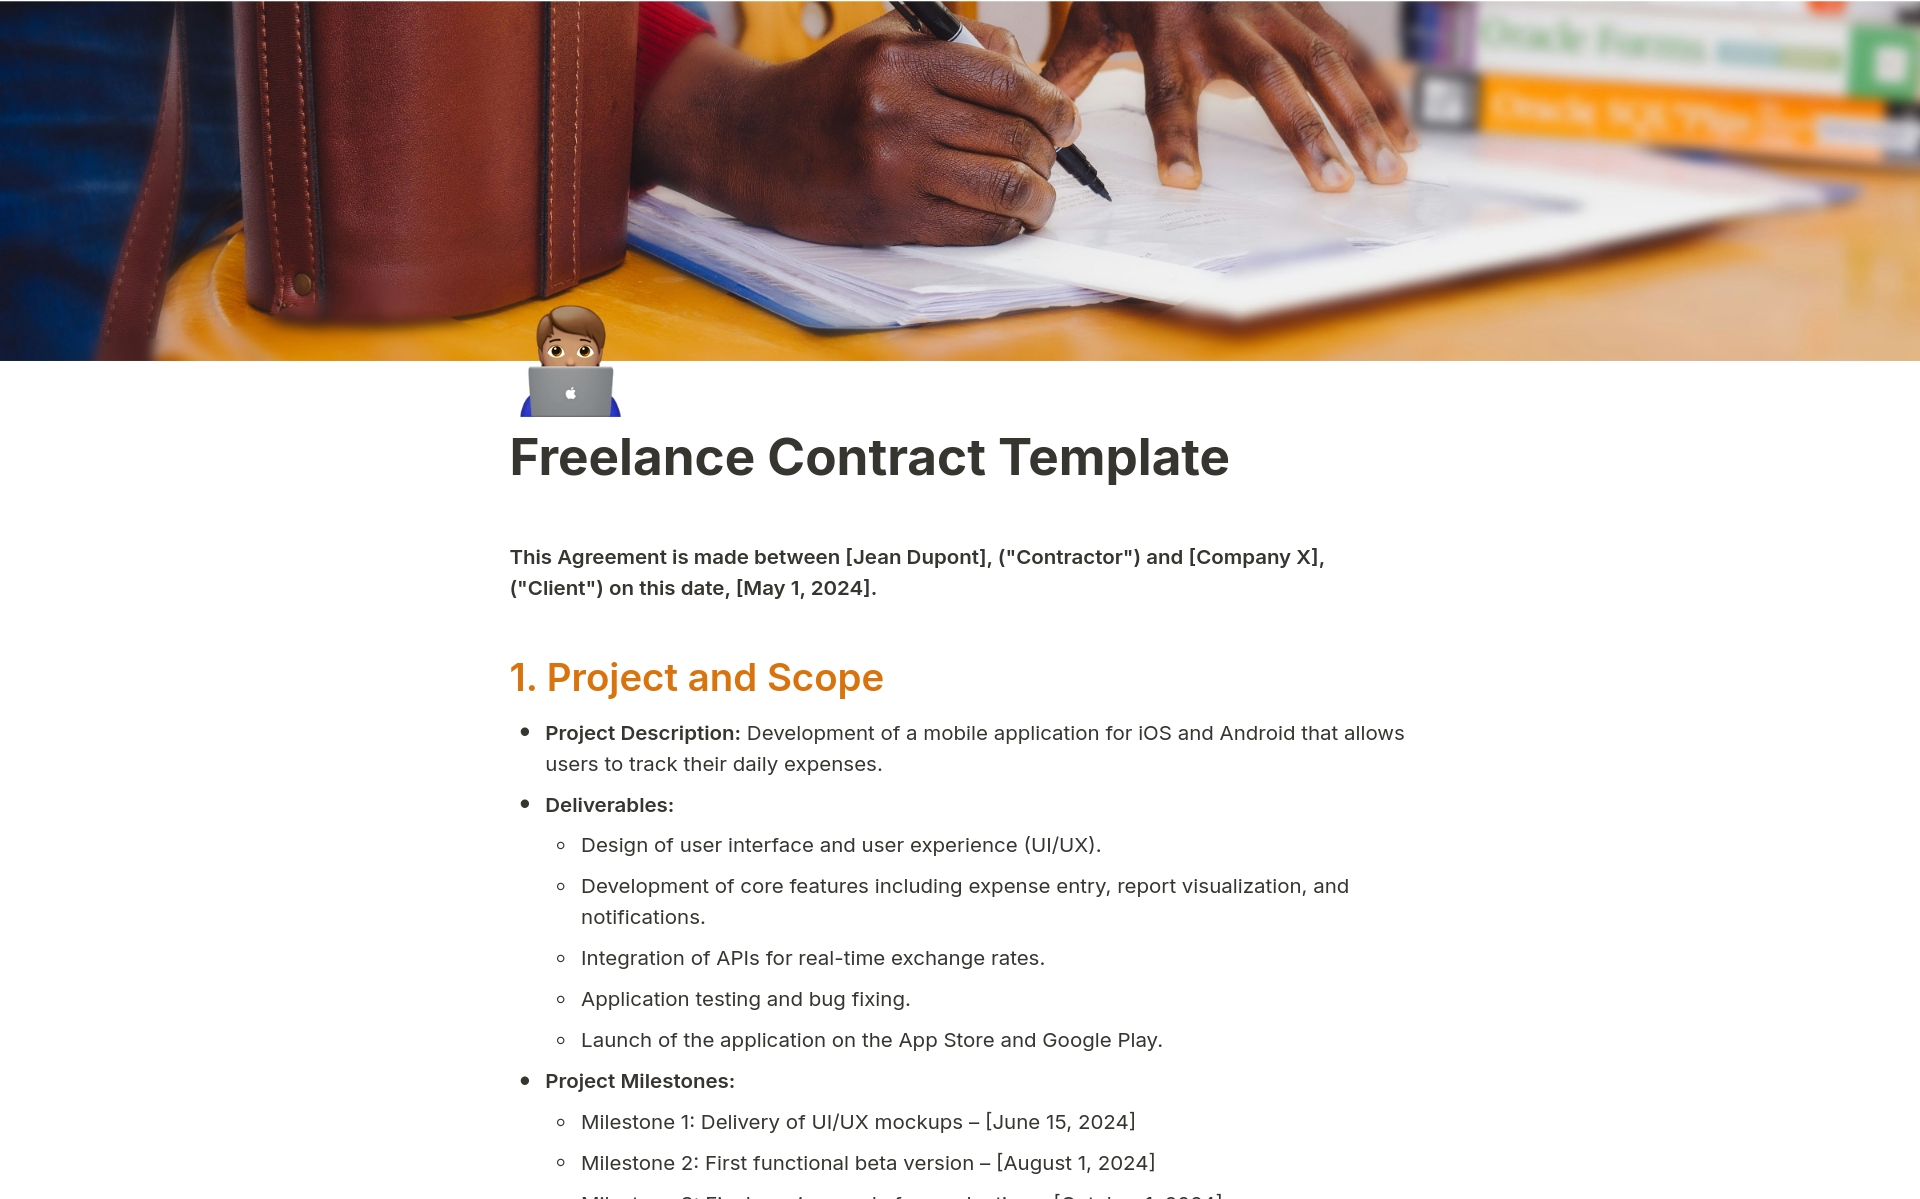 Meticulously crafted Freelance Contract Template, designed specifically for freelance developers working in mobile app creation. 